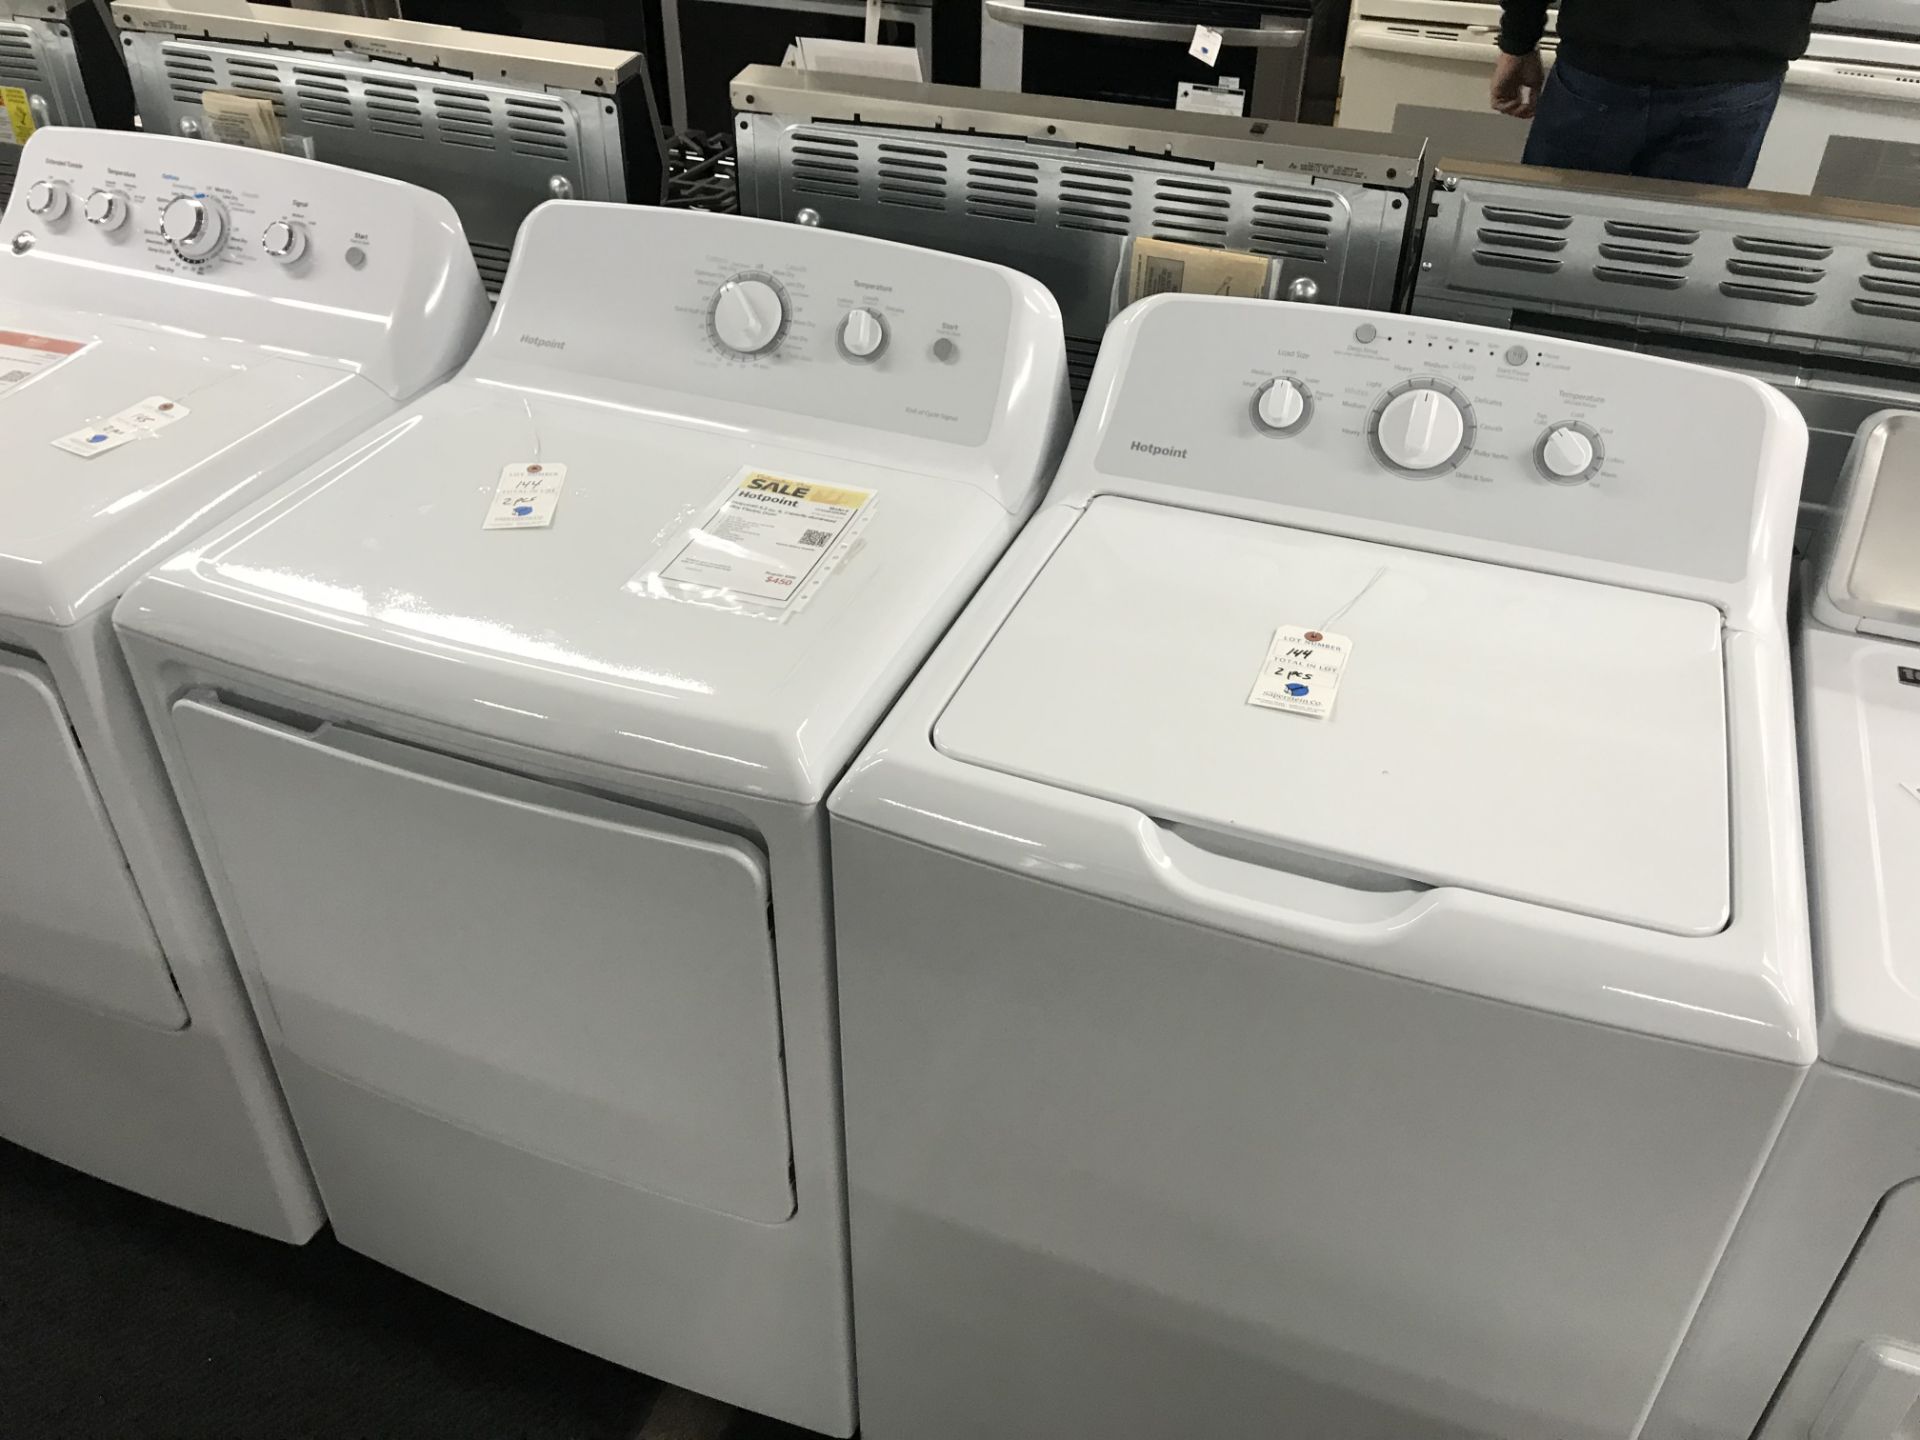 Hot Point 2 Piece Washer & Electric Dryer (Retail Price: $1,000)